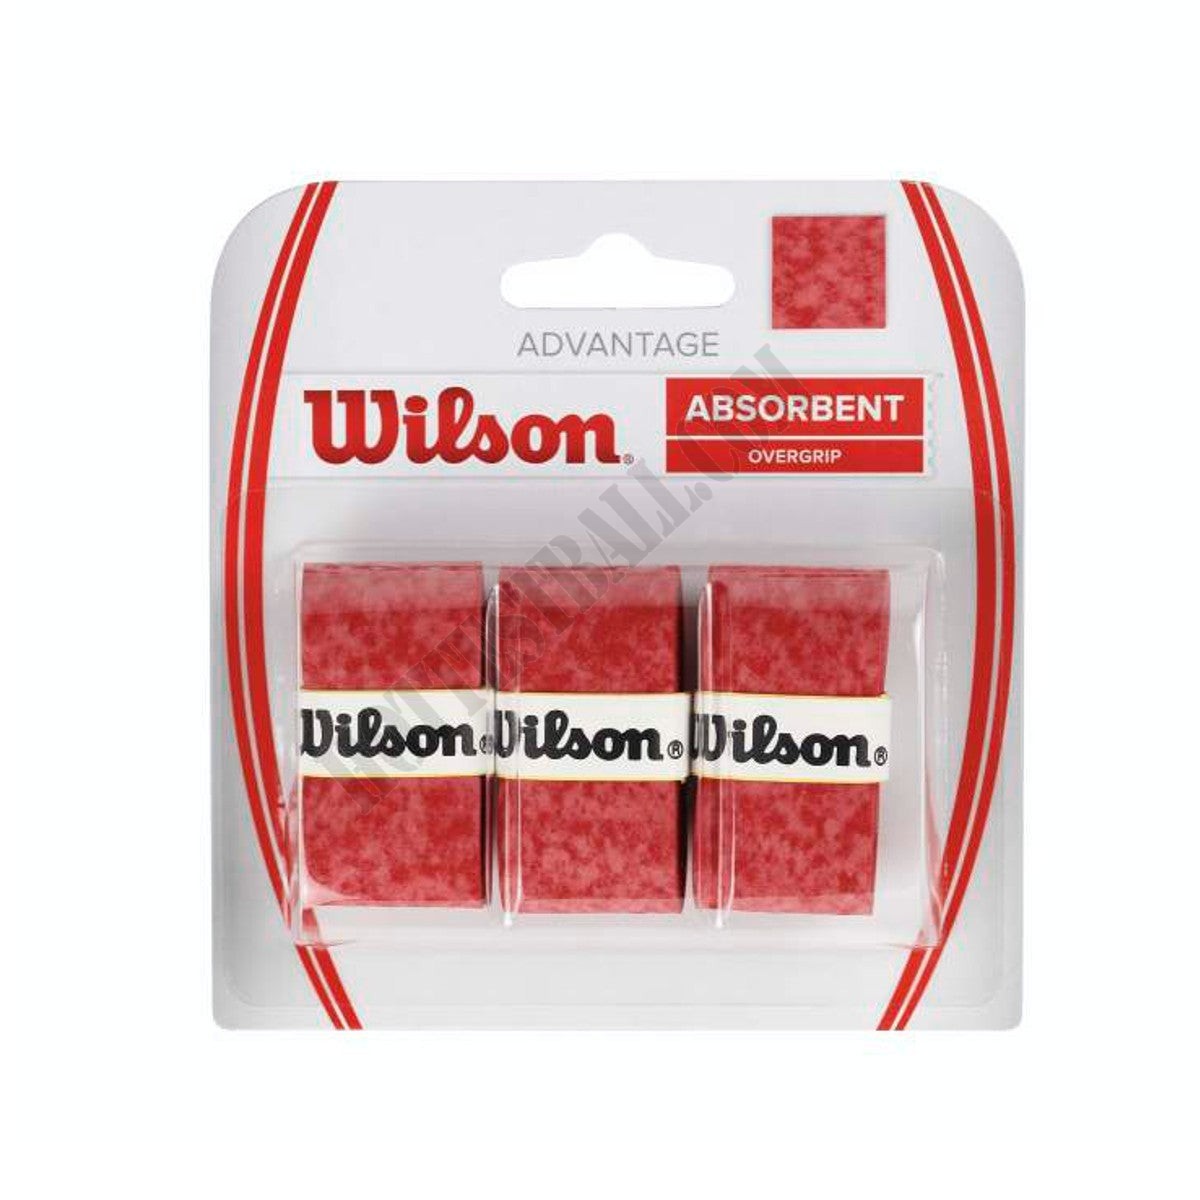 Advantage Overgip, 3 Pack - Wilson Discount Store - -4